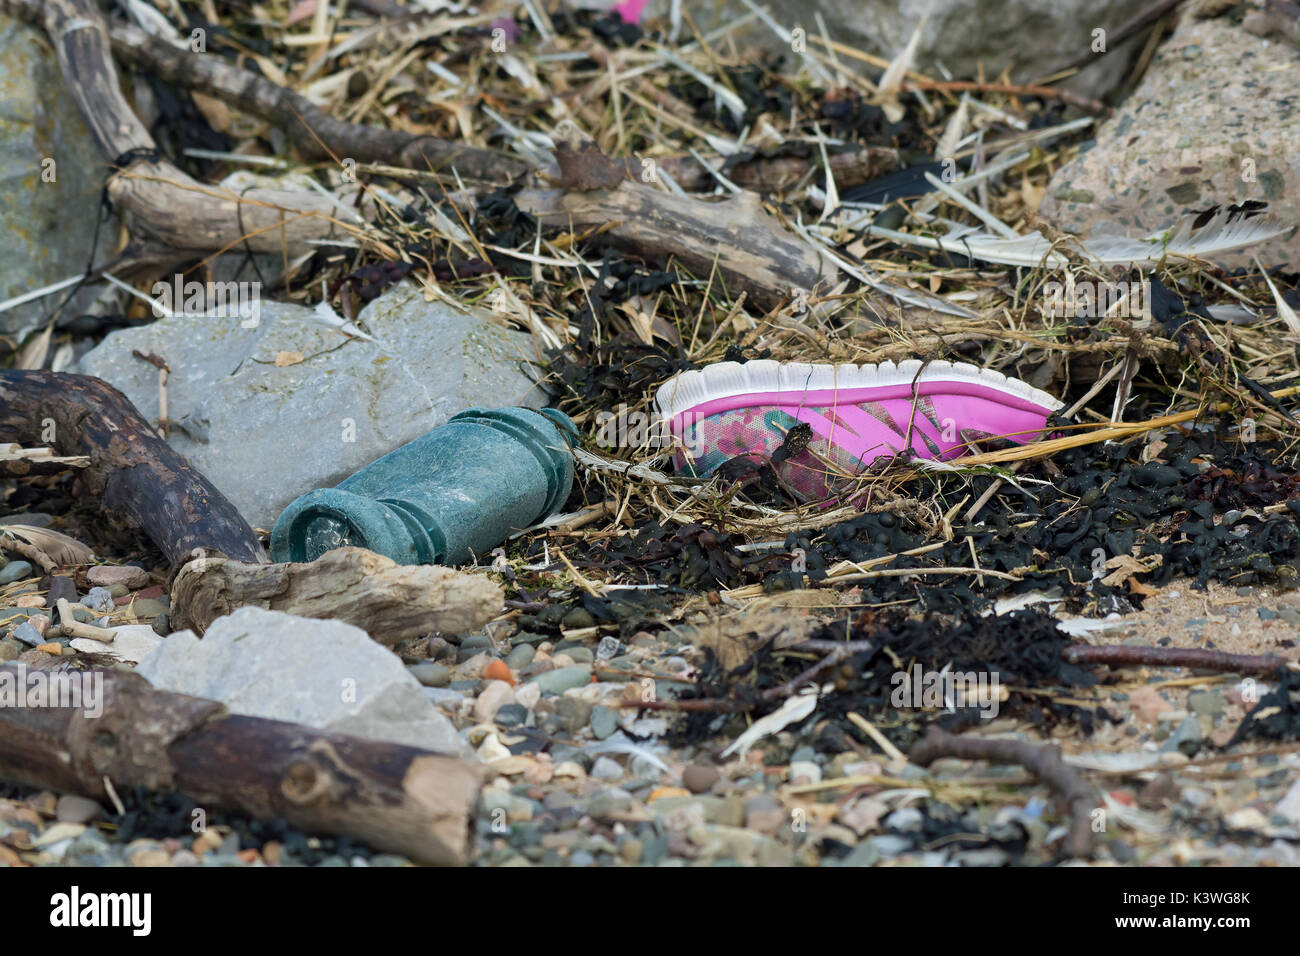 Plastic rubbish washed up on beach in Lancashire Stock Photo